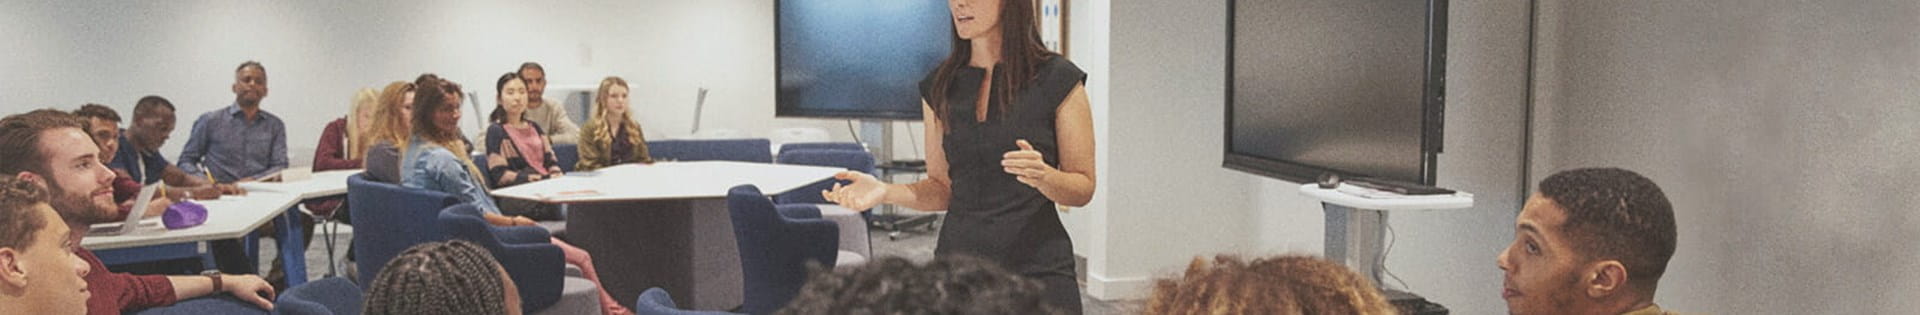 female teacher lecturing students about teaching curriculum in classroom